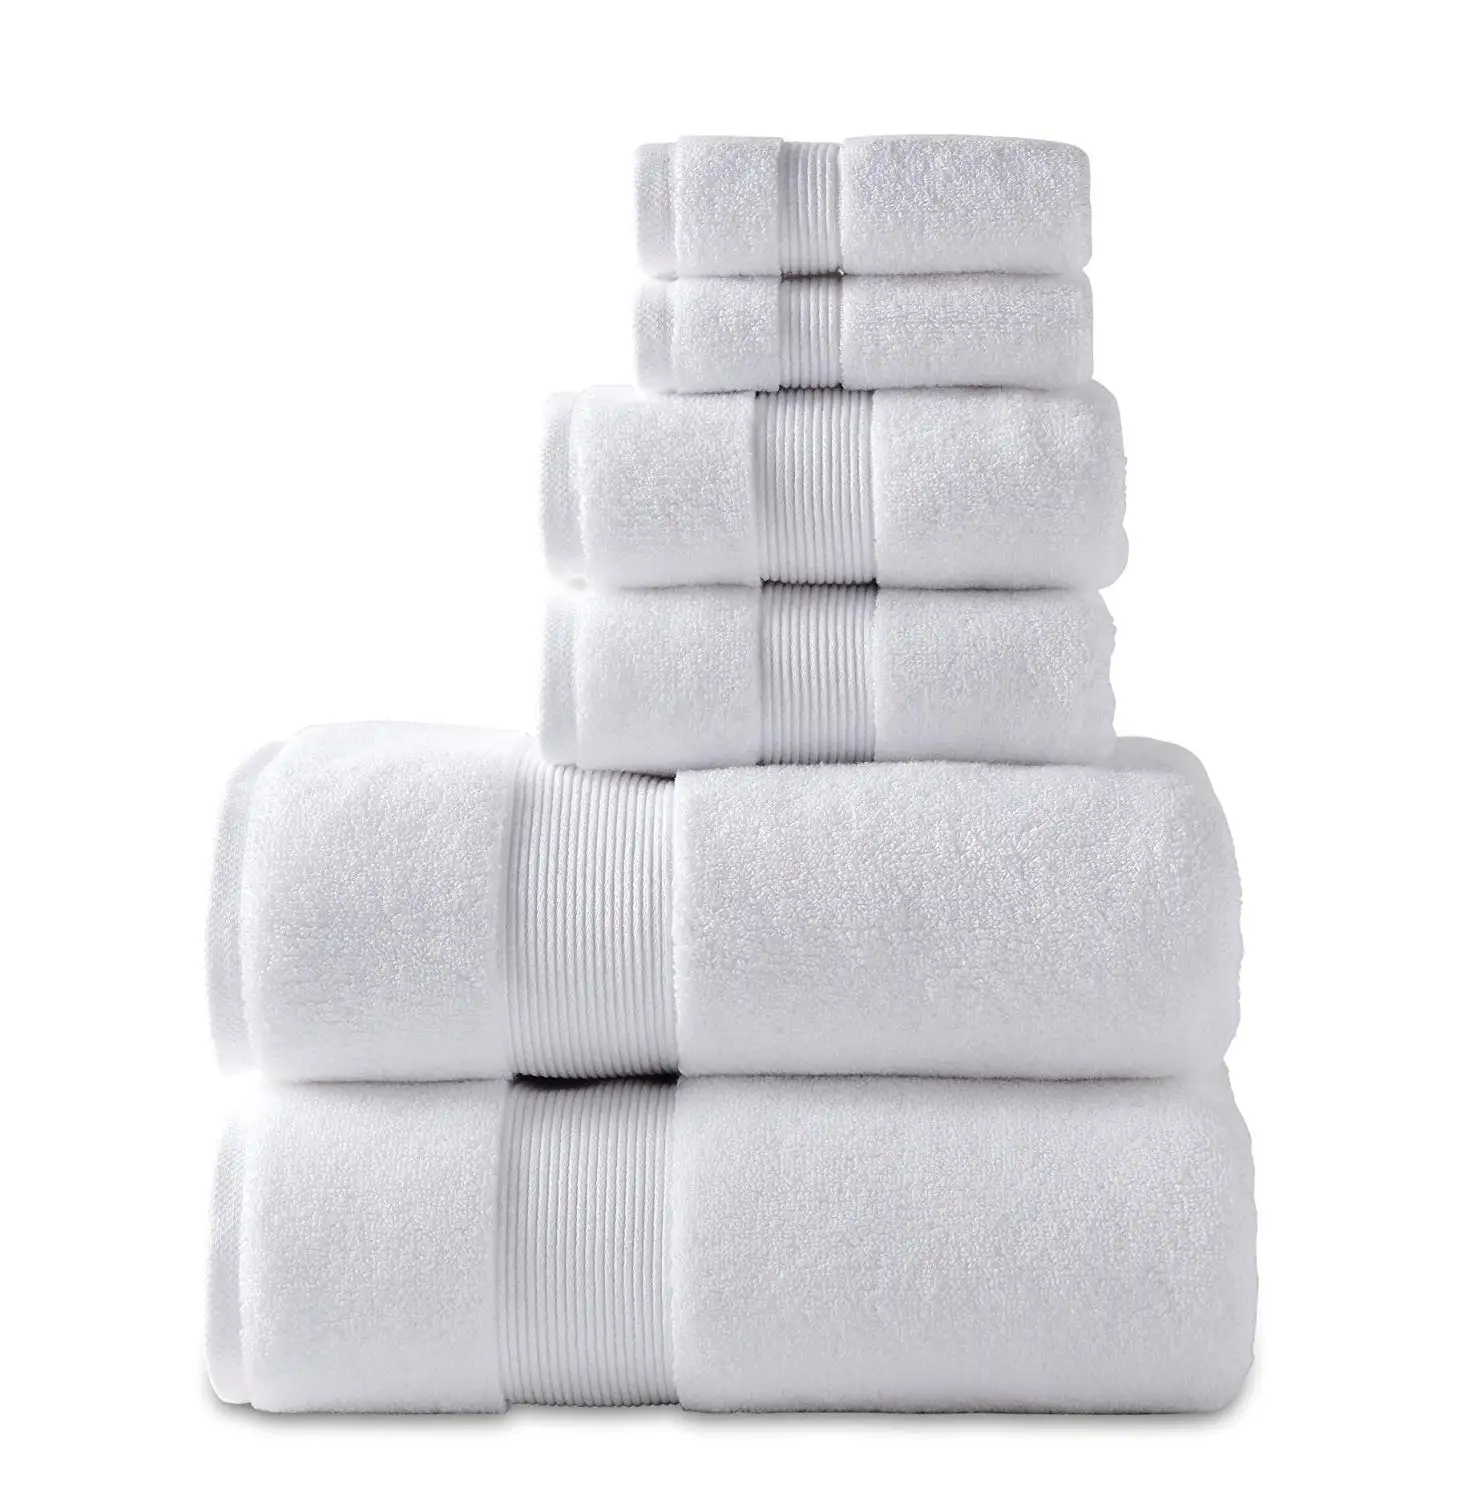 Hot Selling Luxury High Quality Pool Spa Turkish 100% Pure White Cotton Terry Towel Hotel